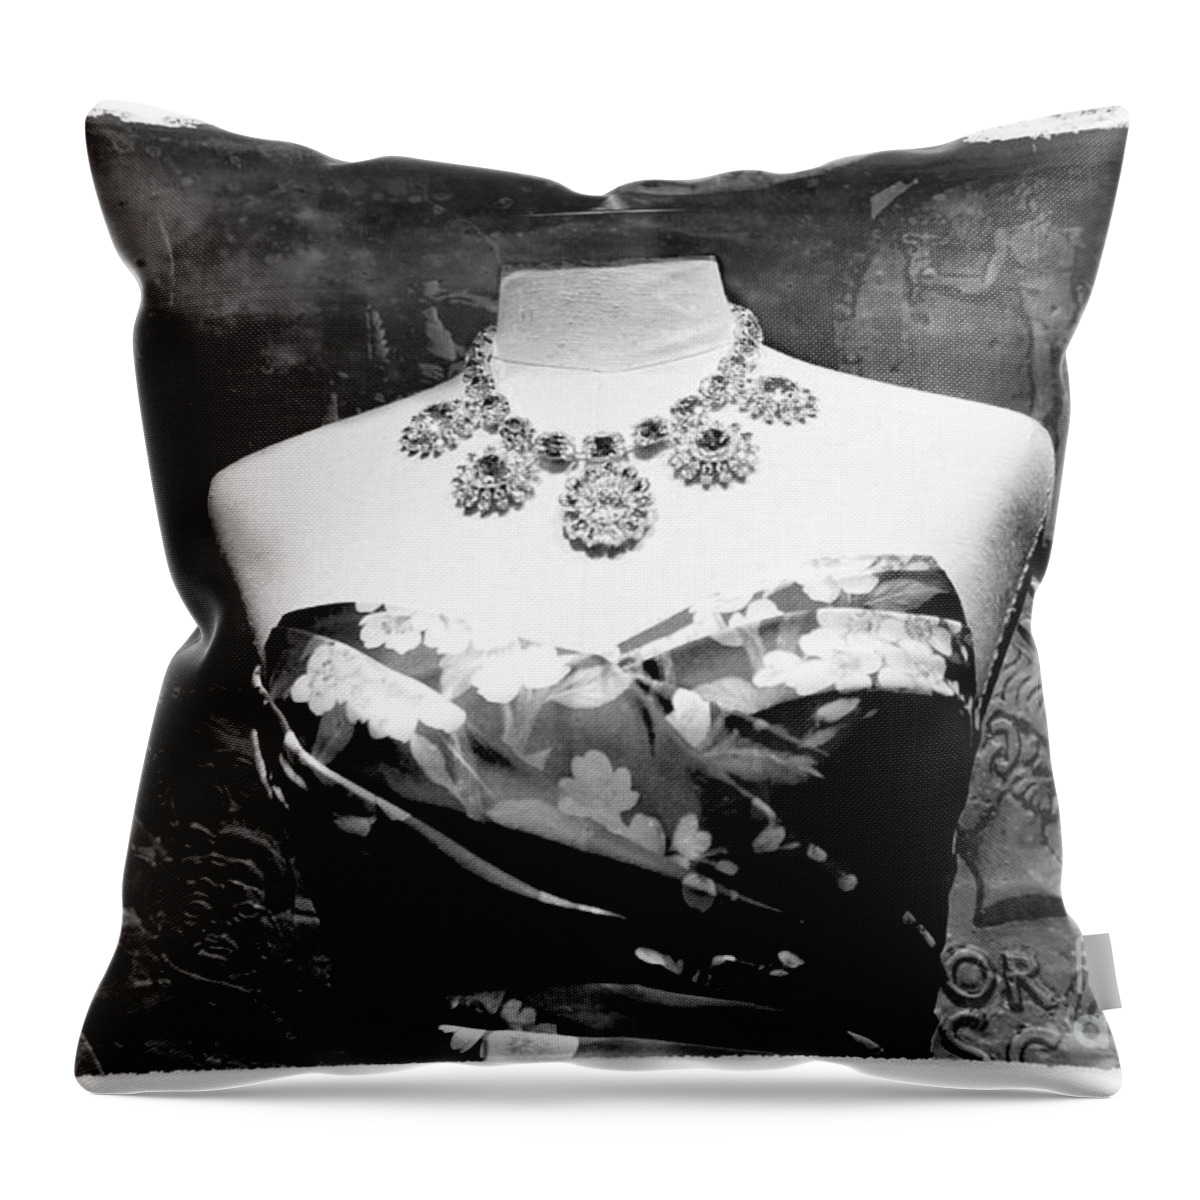 Nina Silver Throw Pillow featuring the photograph Vintage Store Window Mannequin by Nina Silver